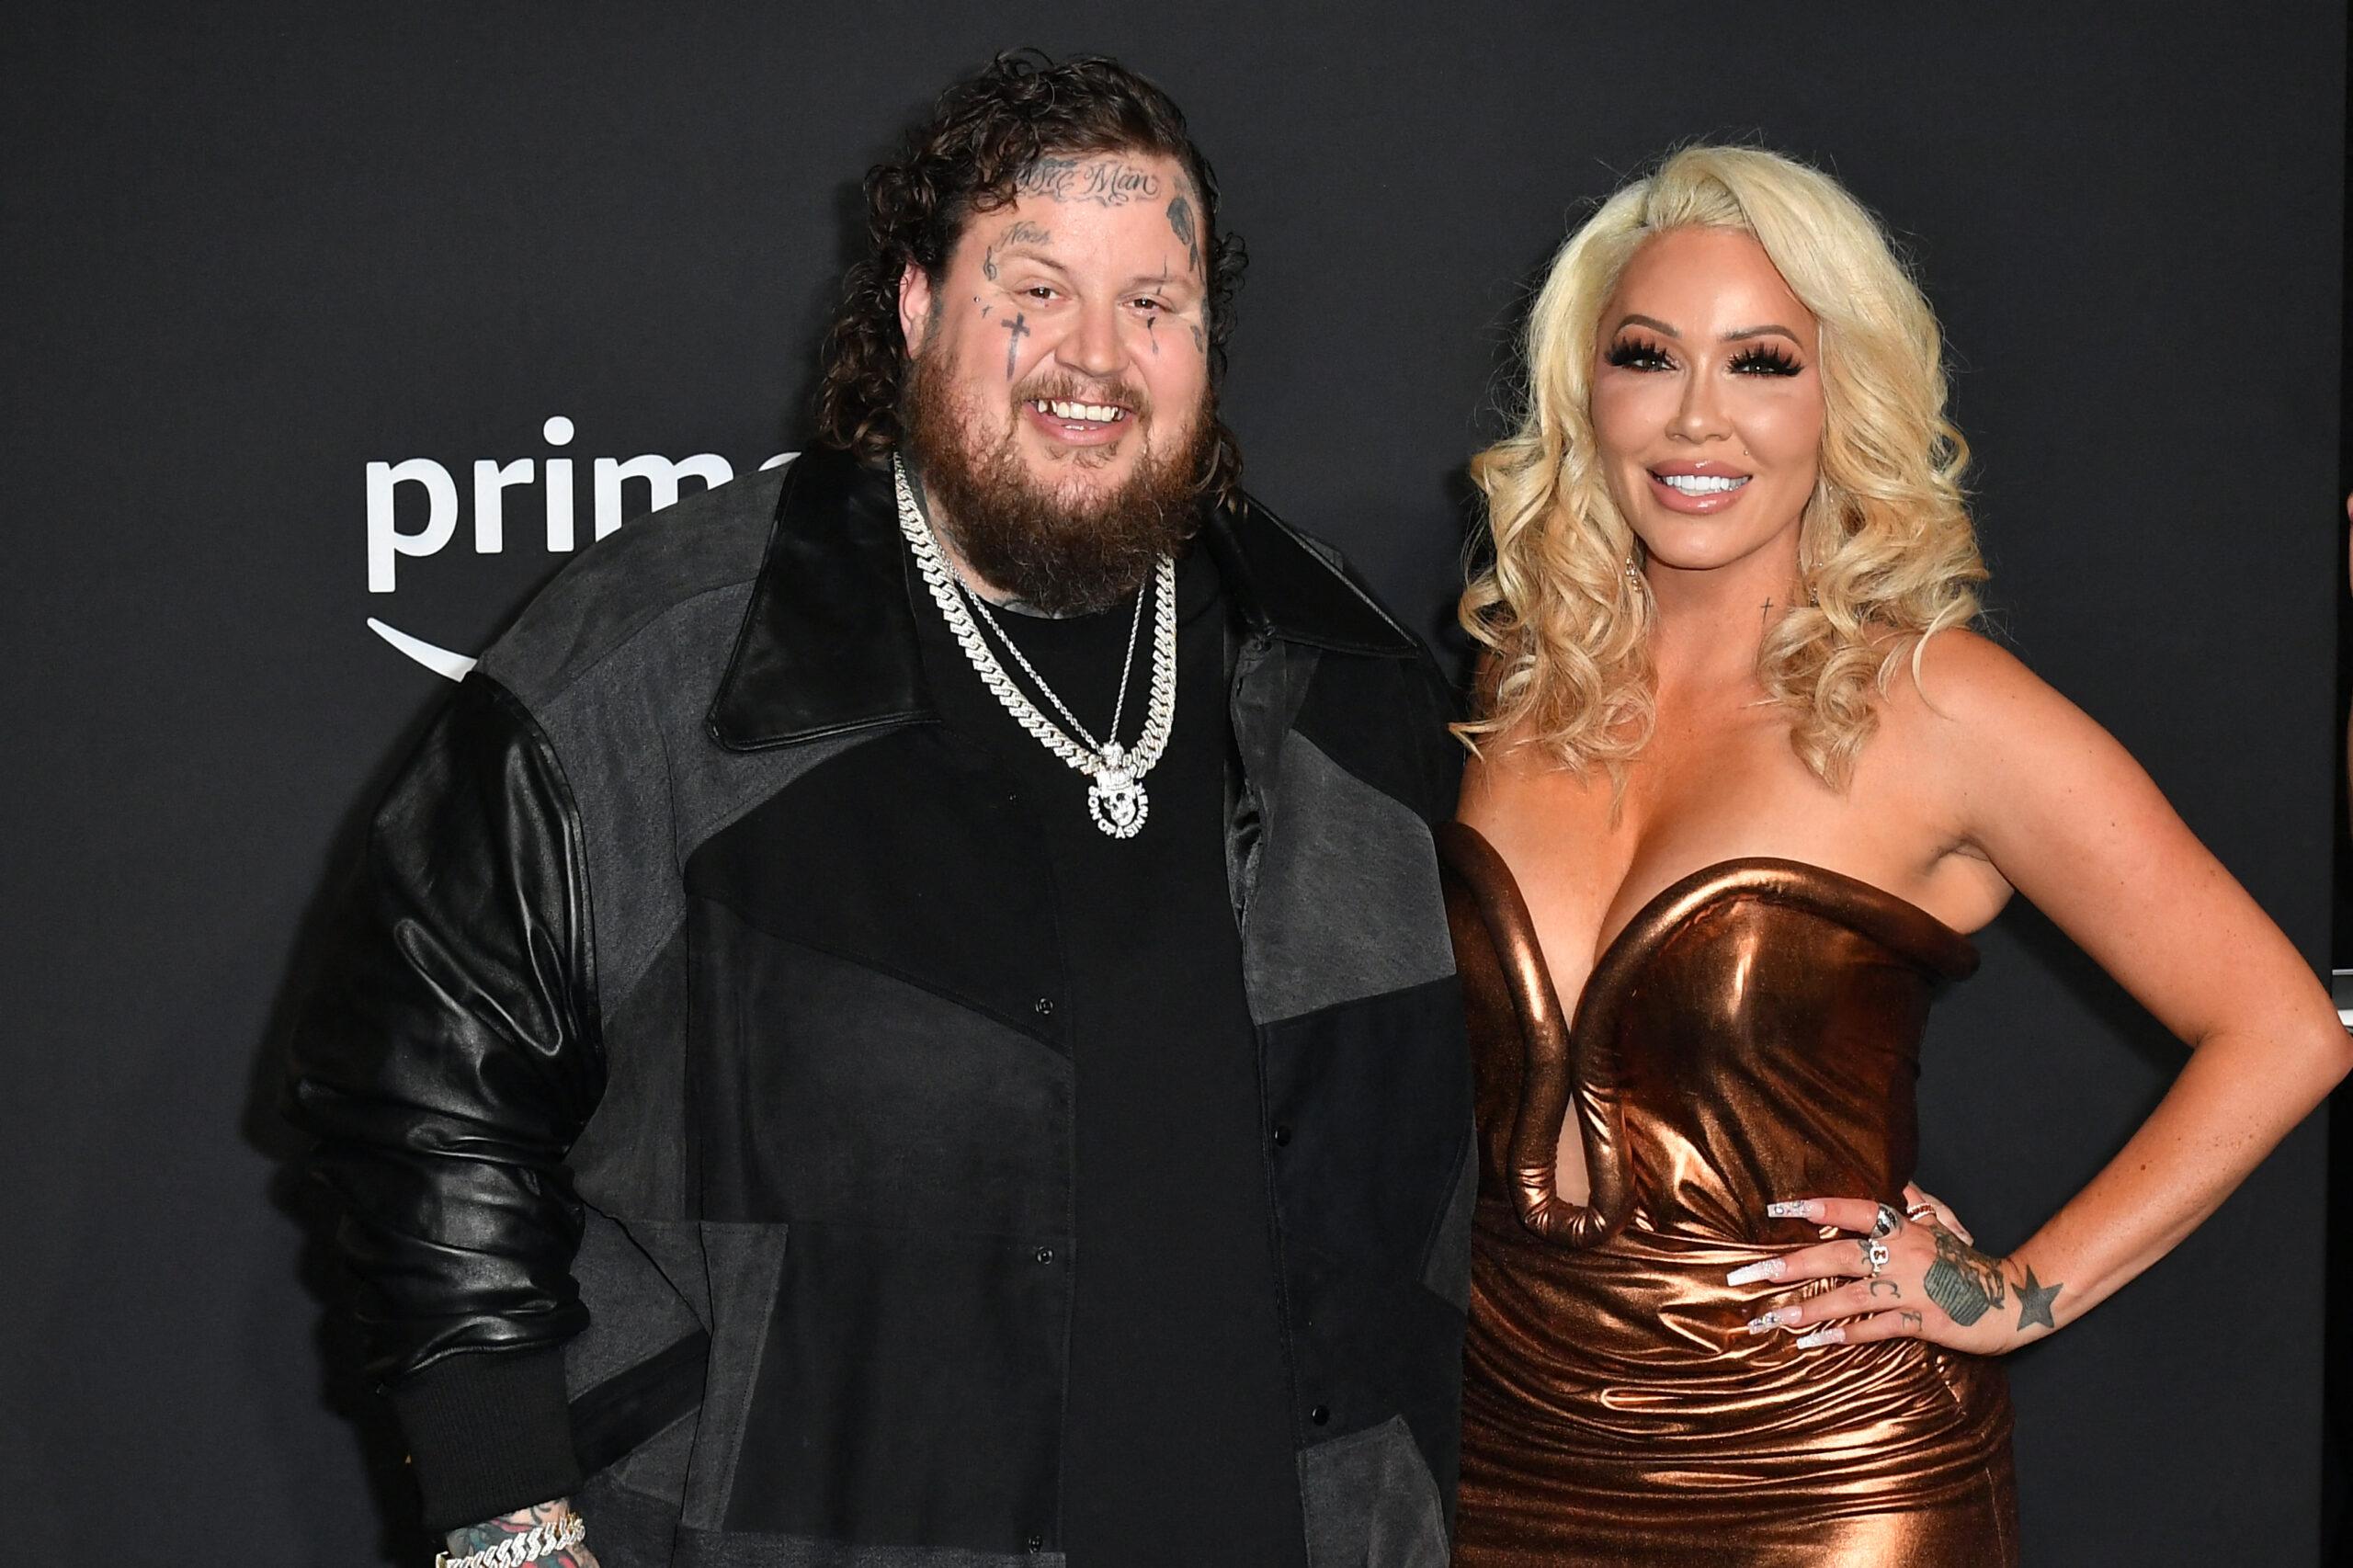 Jelly Roll and Bunnie Xo attend the 58th Annual Academy of Country Music Awards